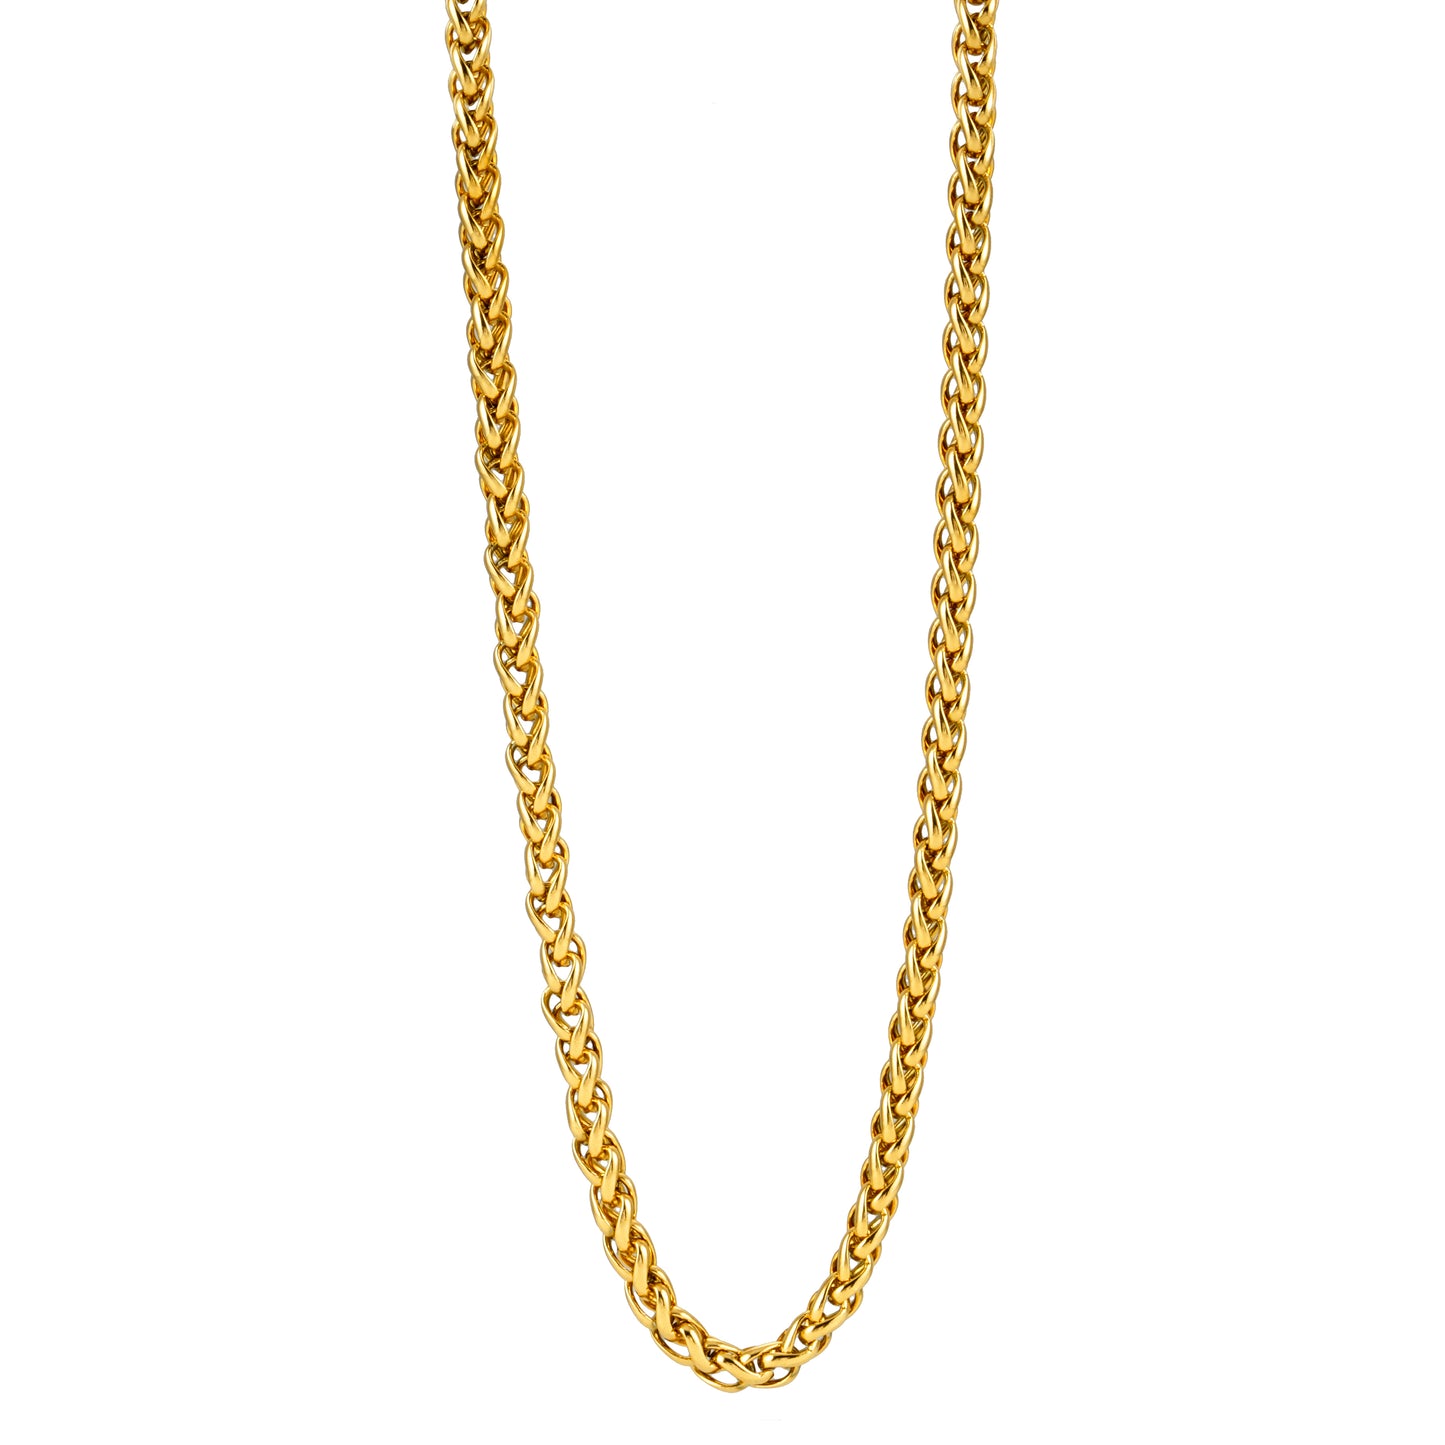 Style ACTON 9759: Mid Width Byzantine Chain Necklace.